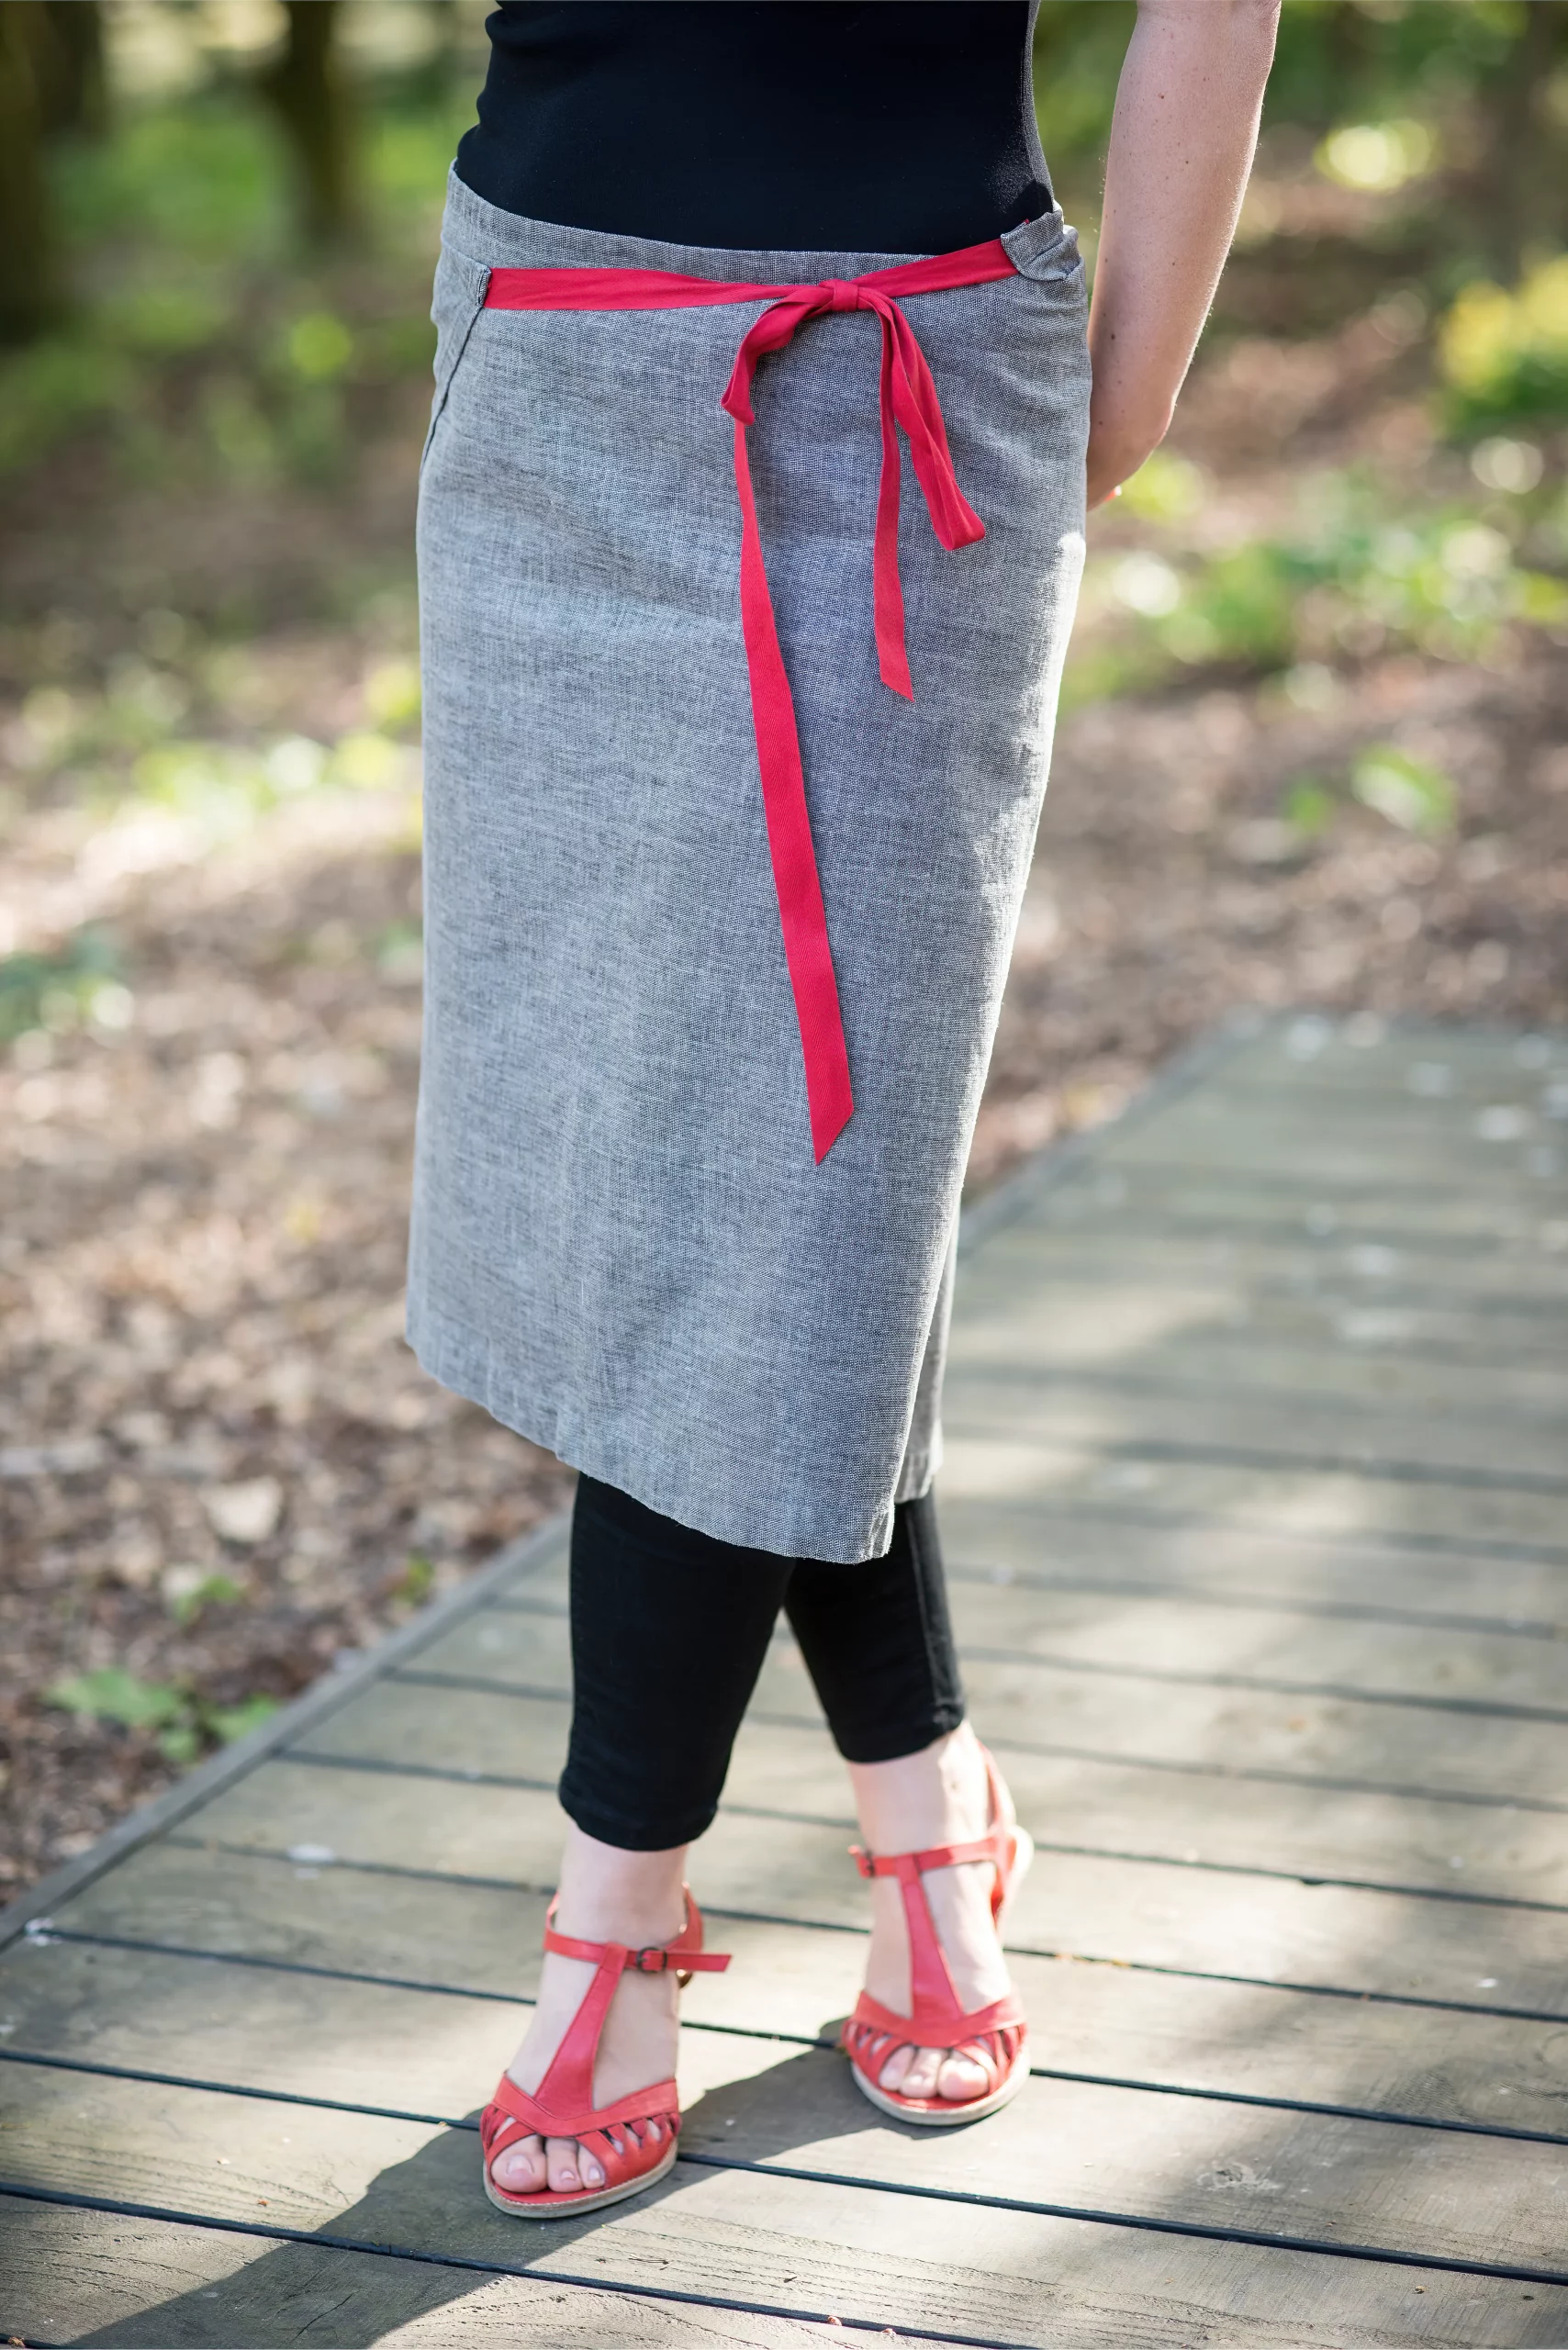 Crop image of gray pencil skirt with red cord belt